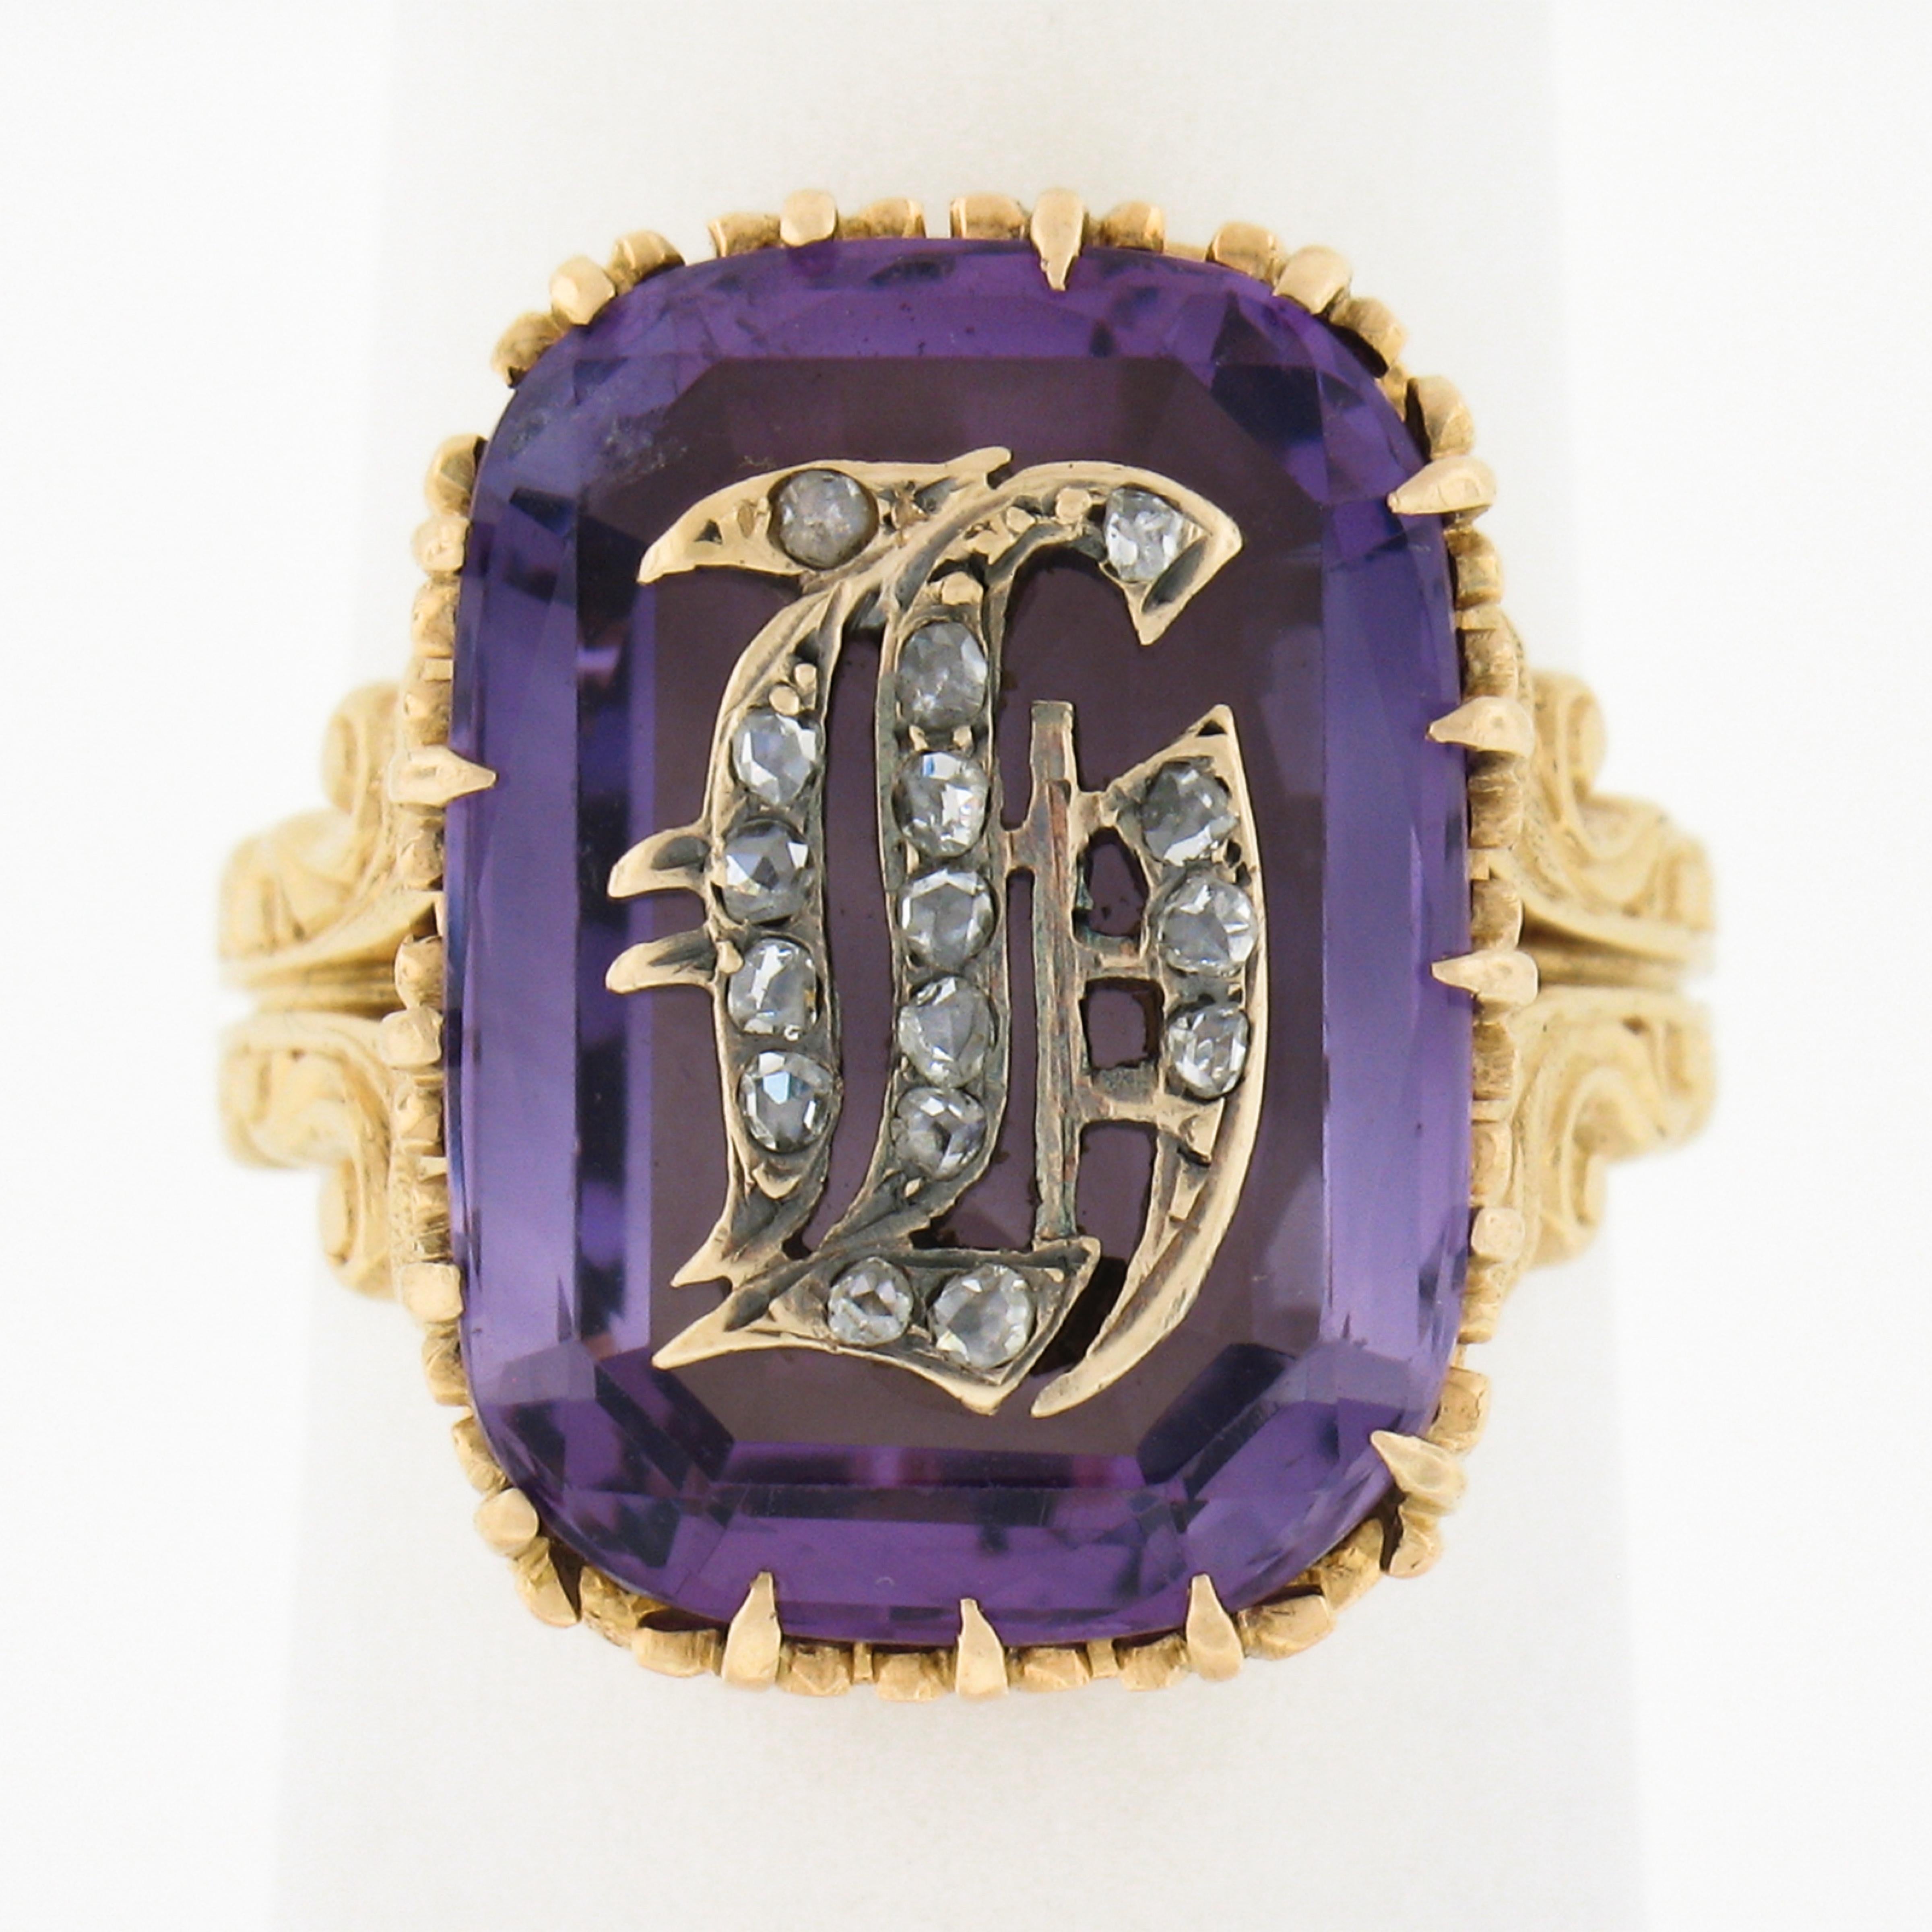 This fancy vintage initial cocktail ring is crafted in  solid 18k yellow gold and features a very fine quality amethyst stone at its center and decorated with fancy prongs and magnificent detailed repousse work throughout the shoulders and the